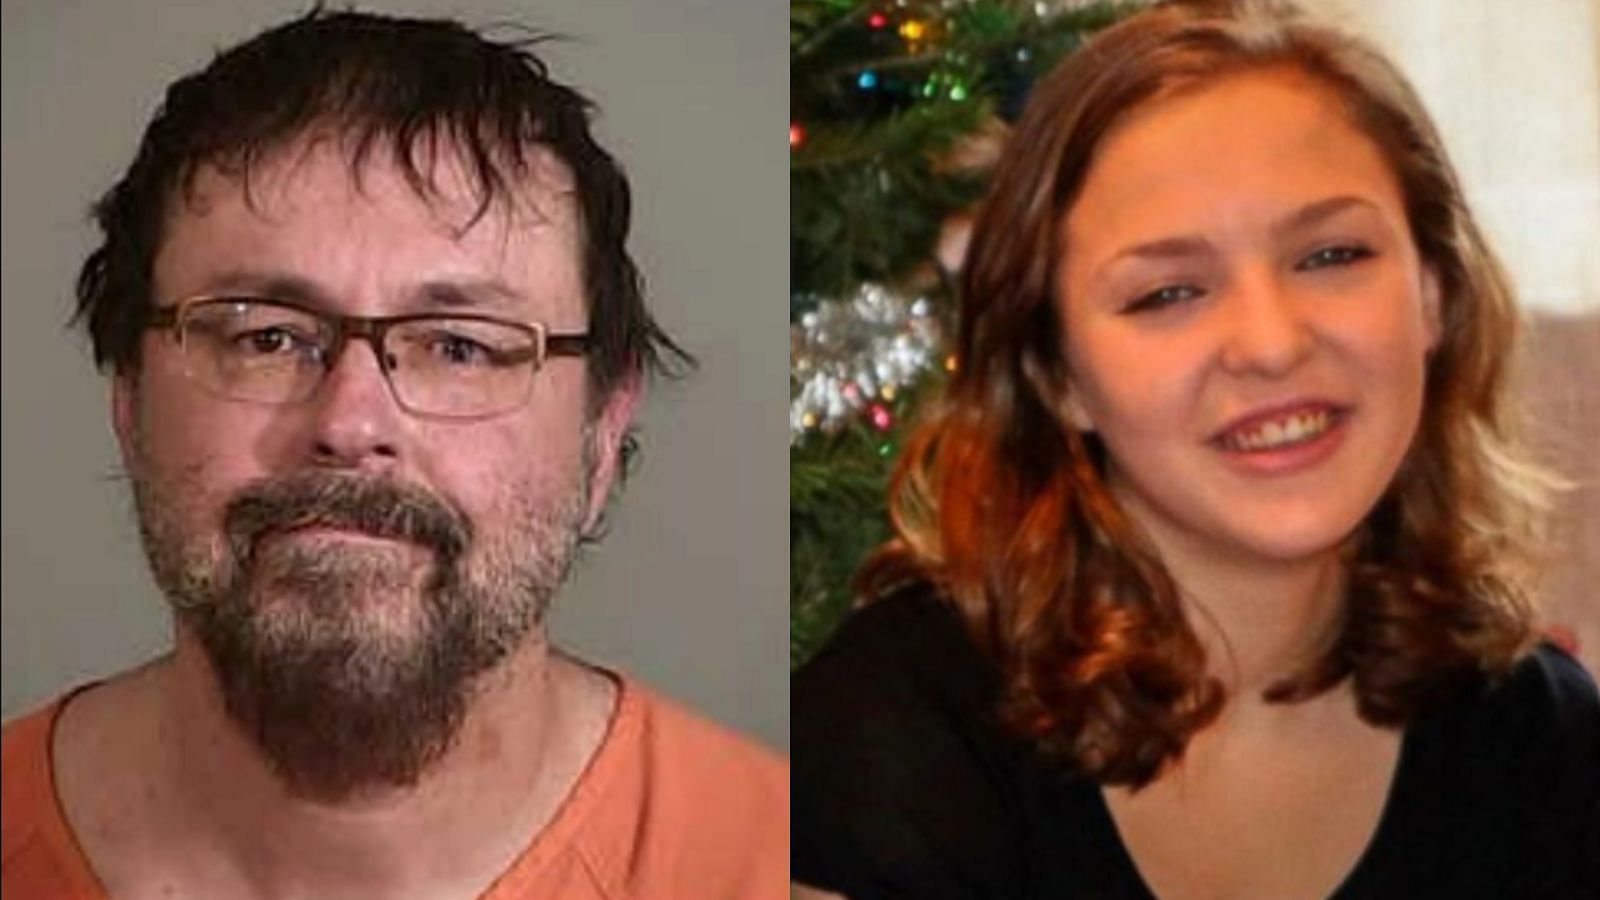 Ted Cummins kidnapped and s*xually assaulted 15-year-old Elizabeth Thomas (Images via Yahoo)